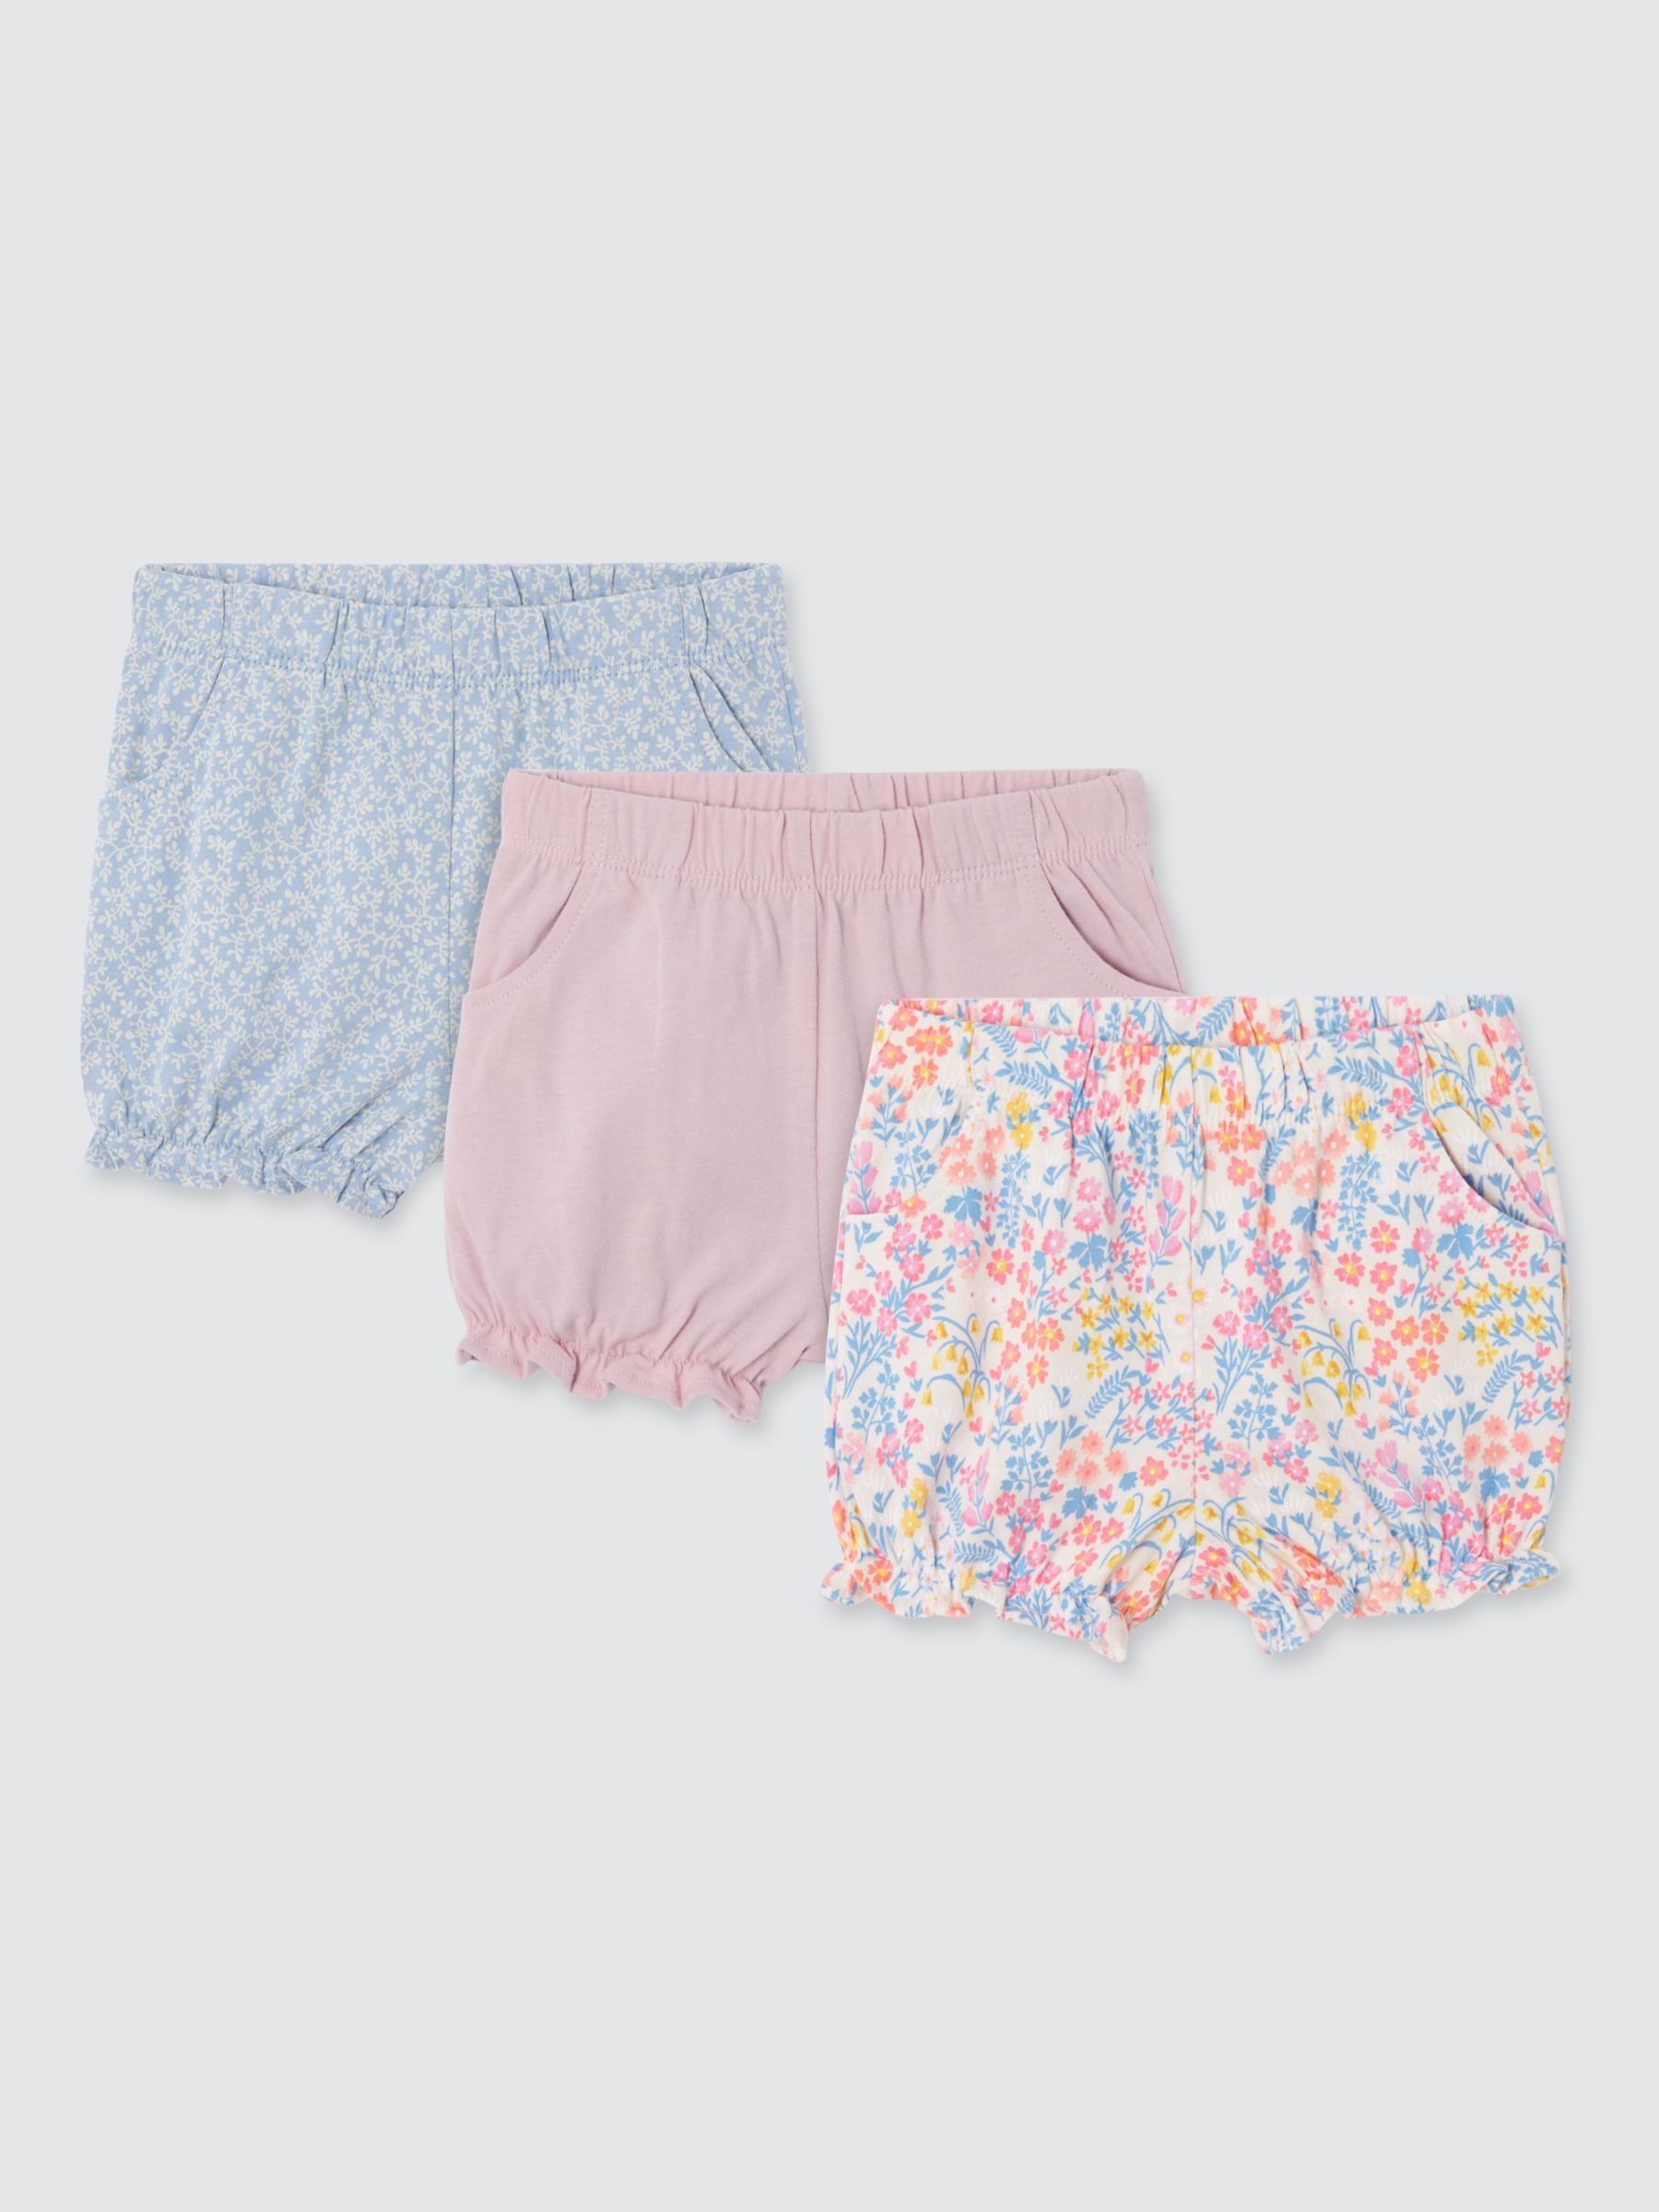 John Lewis Baby Floral Shorts, Pack of 3, Multi, 6-9 months